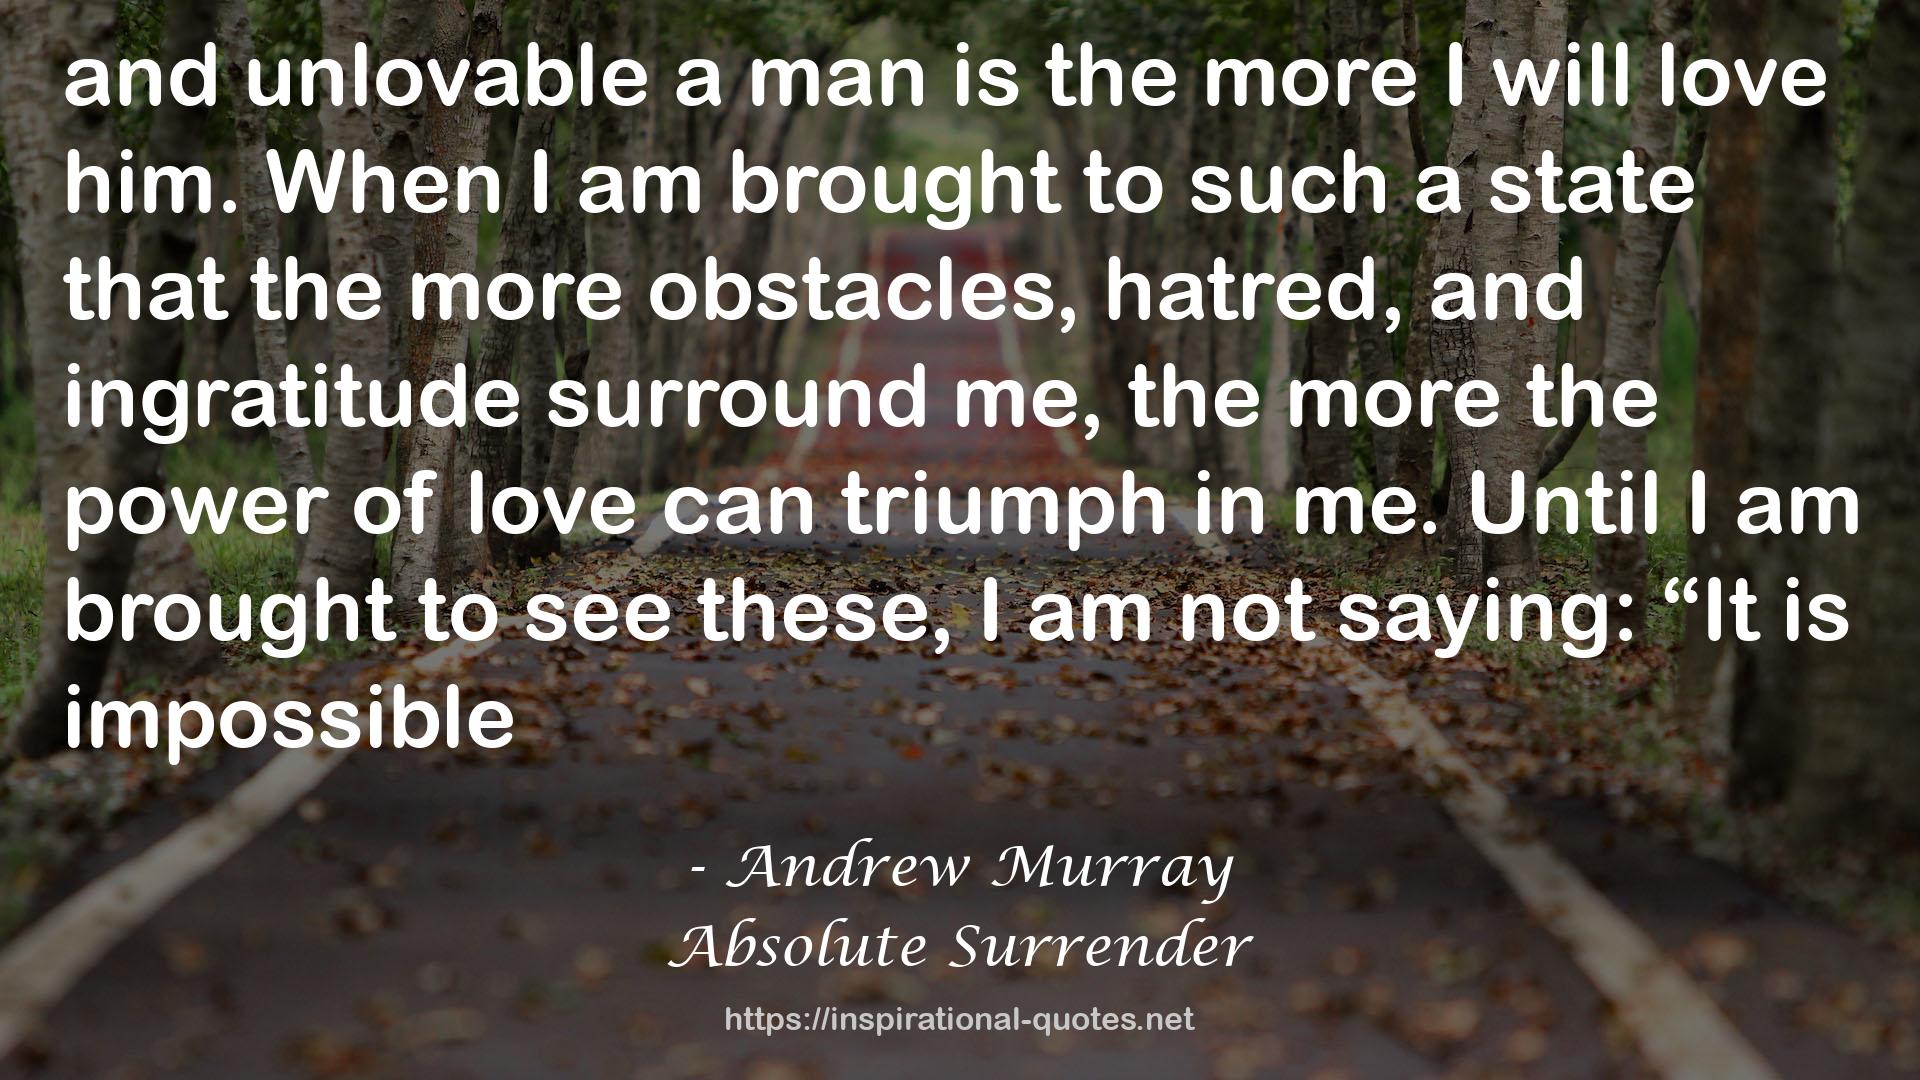 Absolute Surrender QUOTES